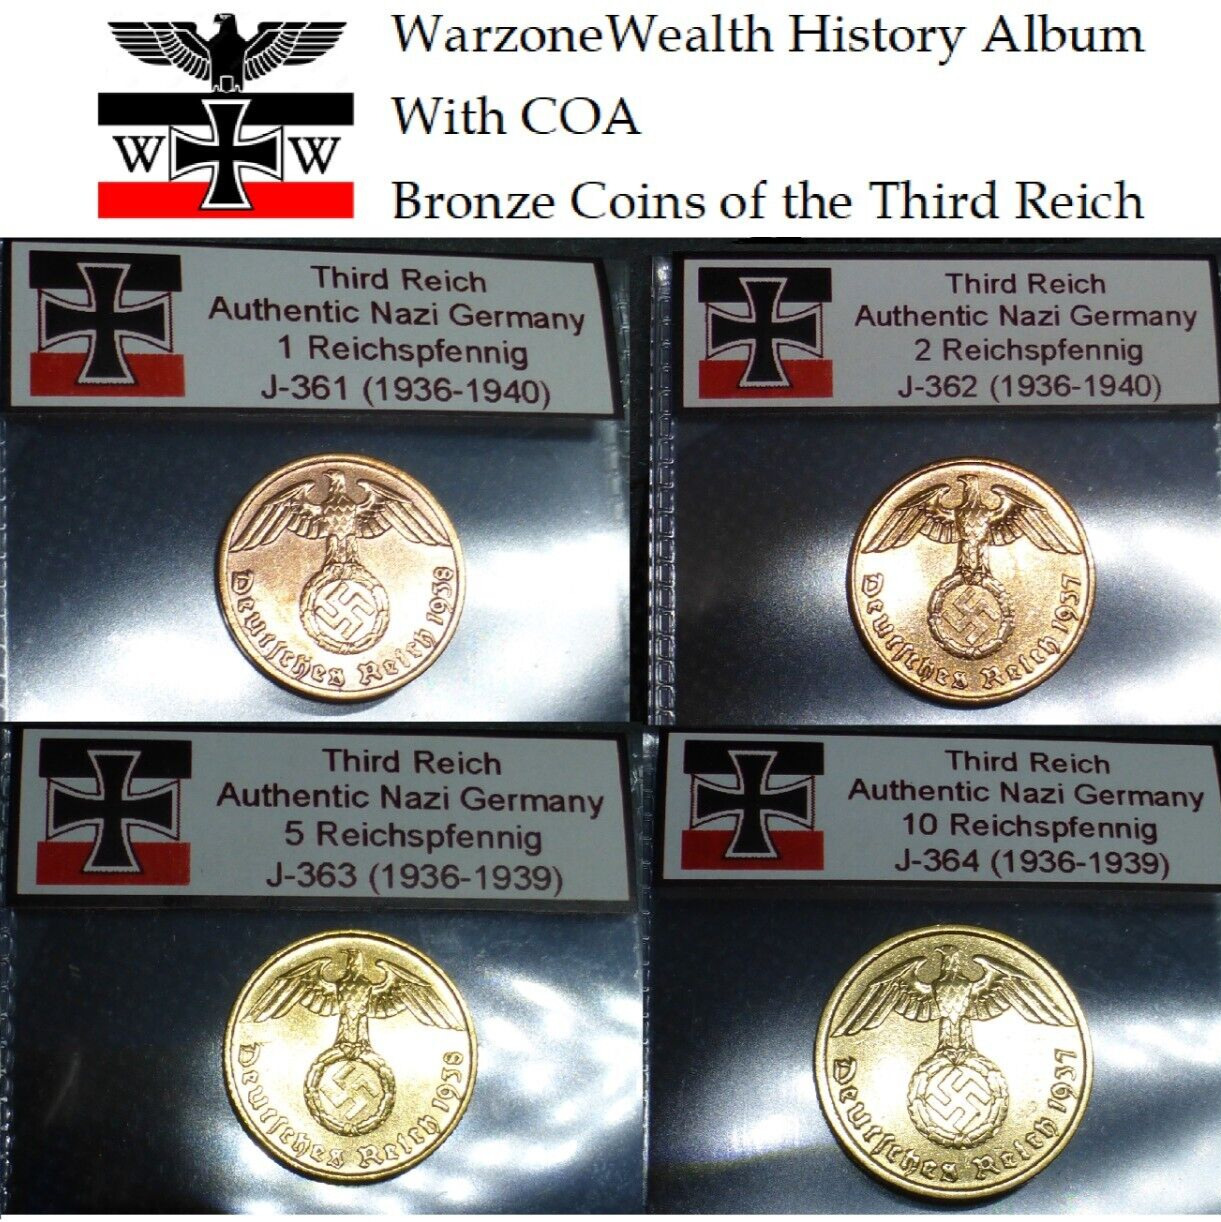 Nazi History Album *with COA* - Bronze Coins of the Third Reich, WW2-era Germany